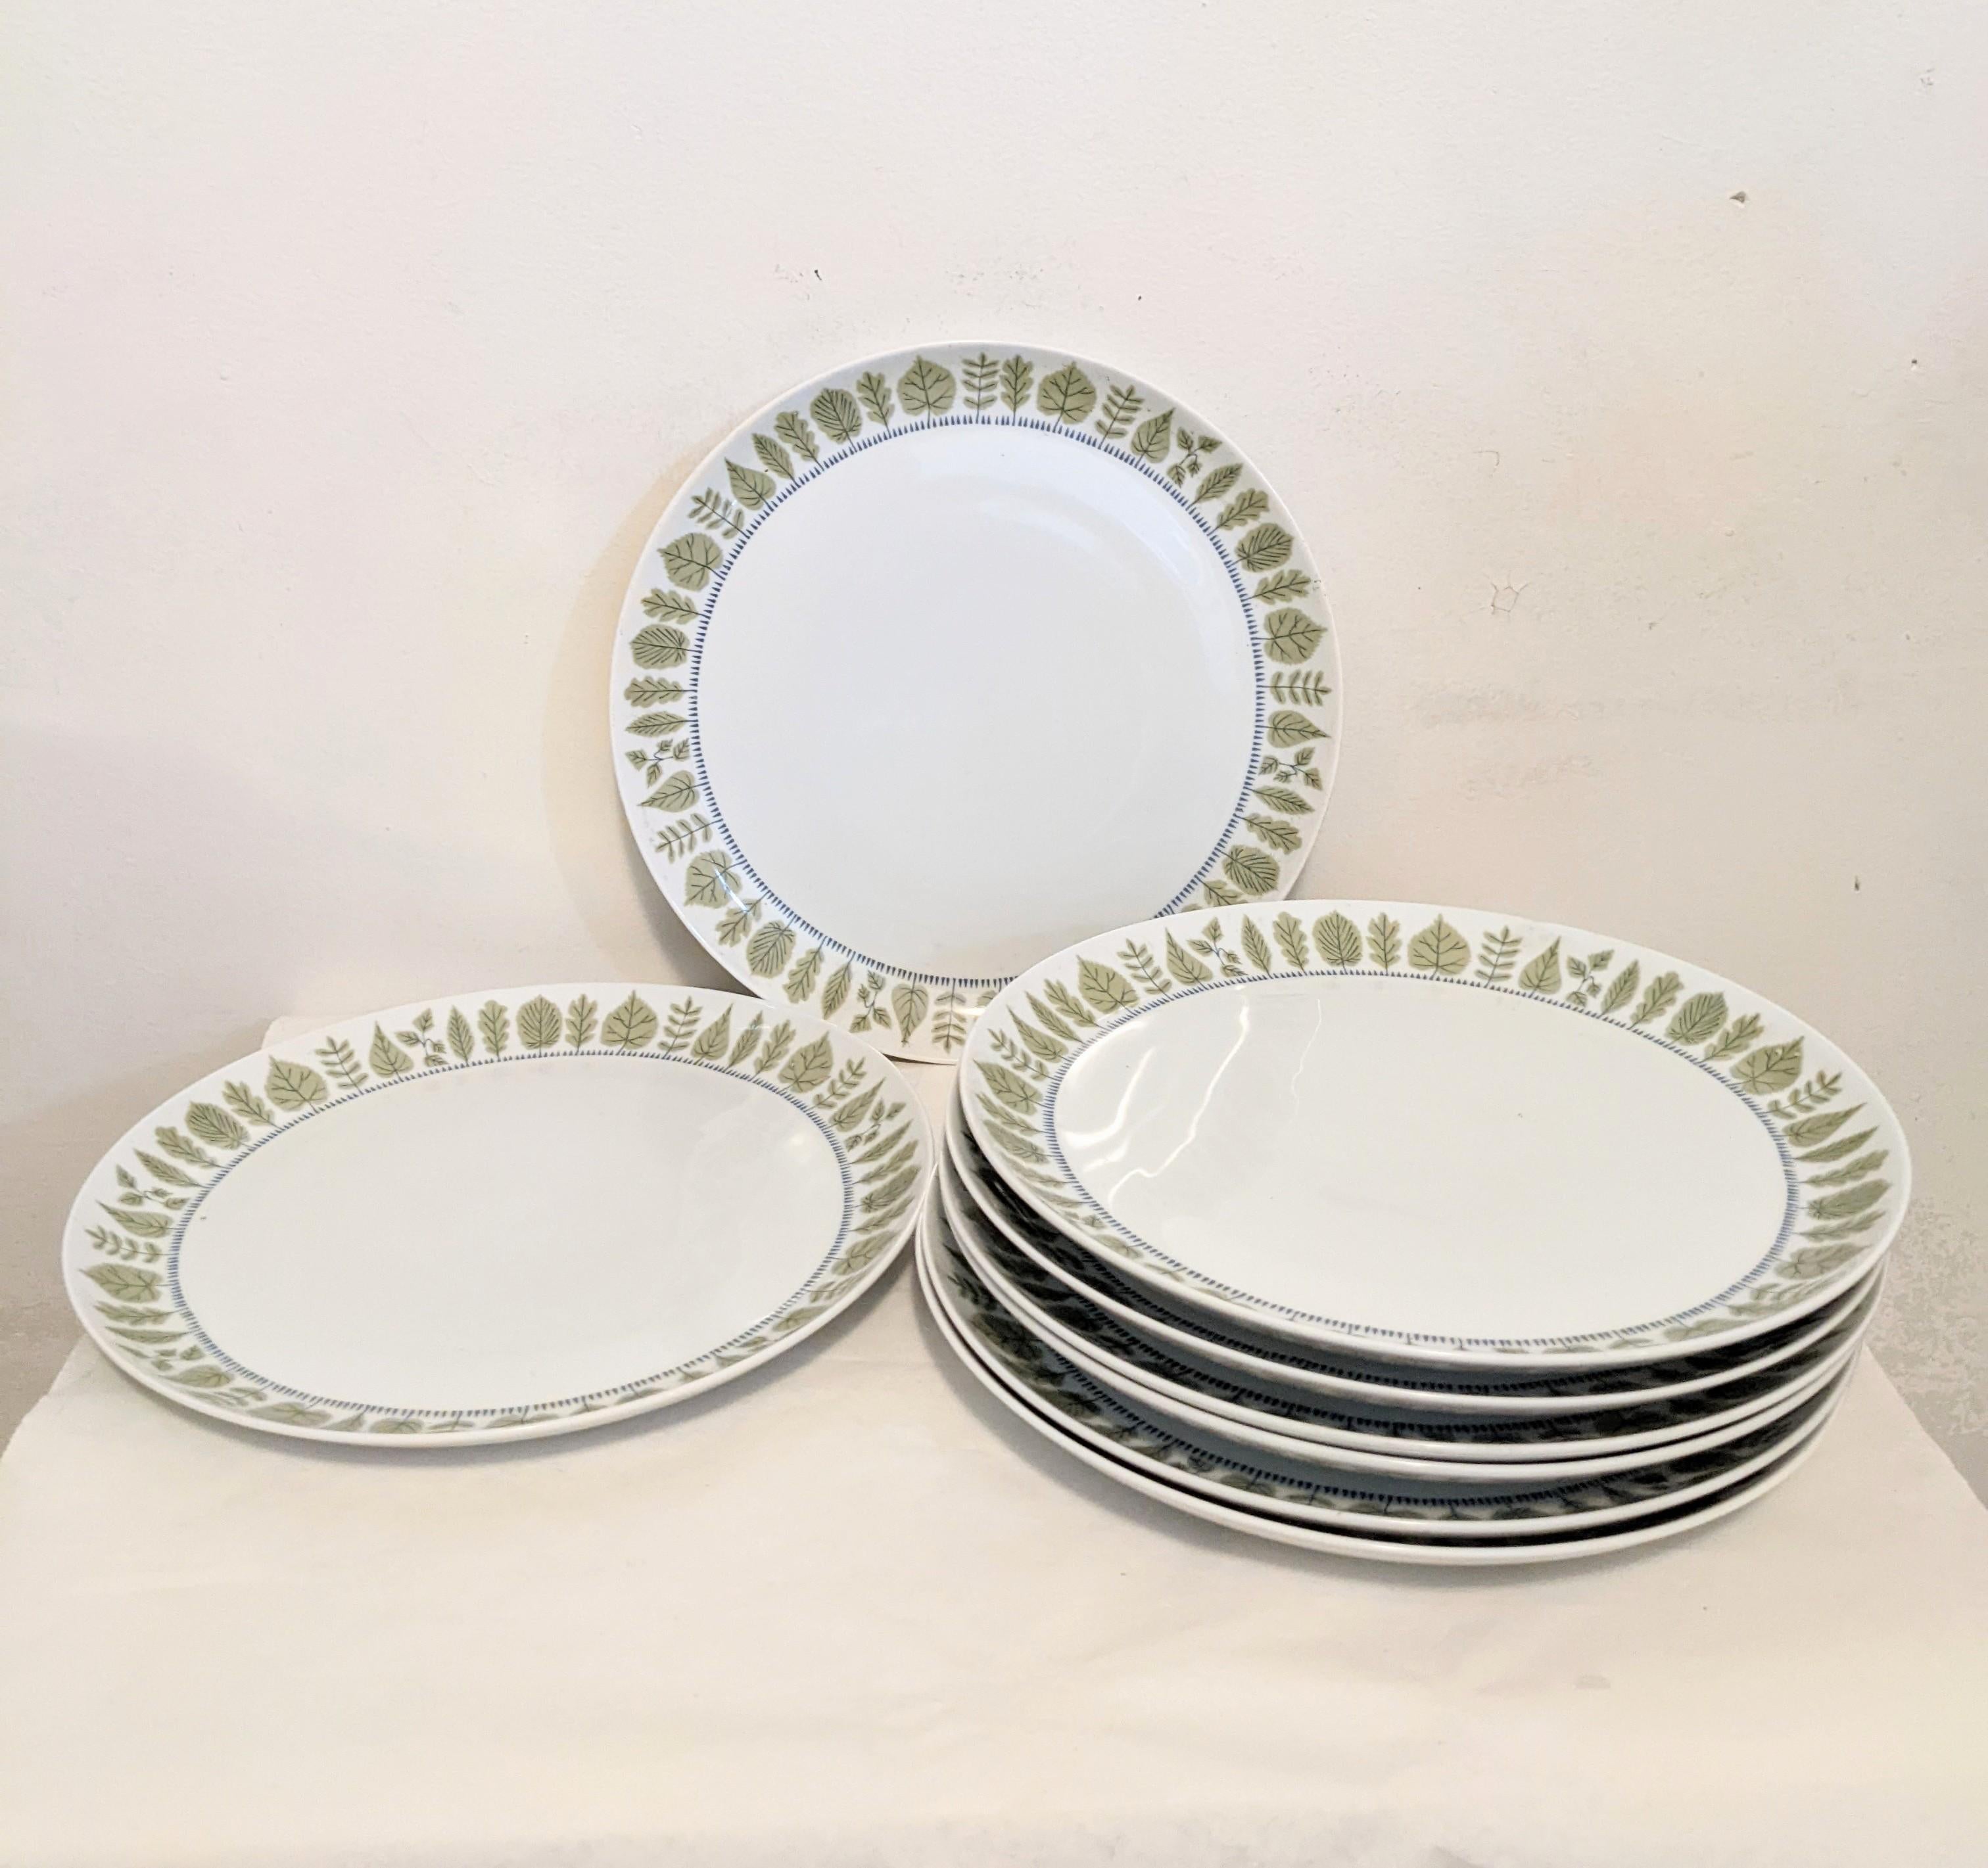 Set of 8 Upsala Ekeby Serving Platters, Karlskrona Sylvia Pattern from the 1960's with autumnal leaf edge pattern which is a beautiful Karlskrona classic. Can be used as a dinner plates, but they are rather large and would well as a set of lovely